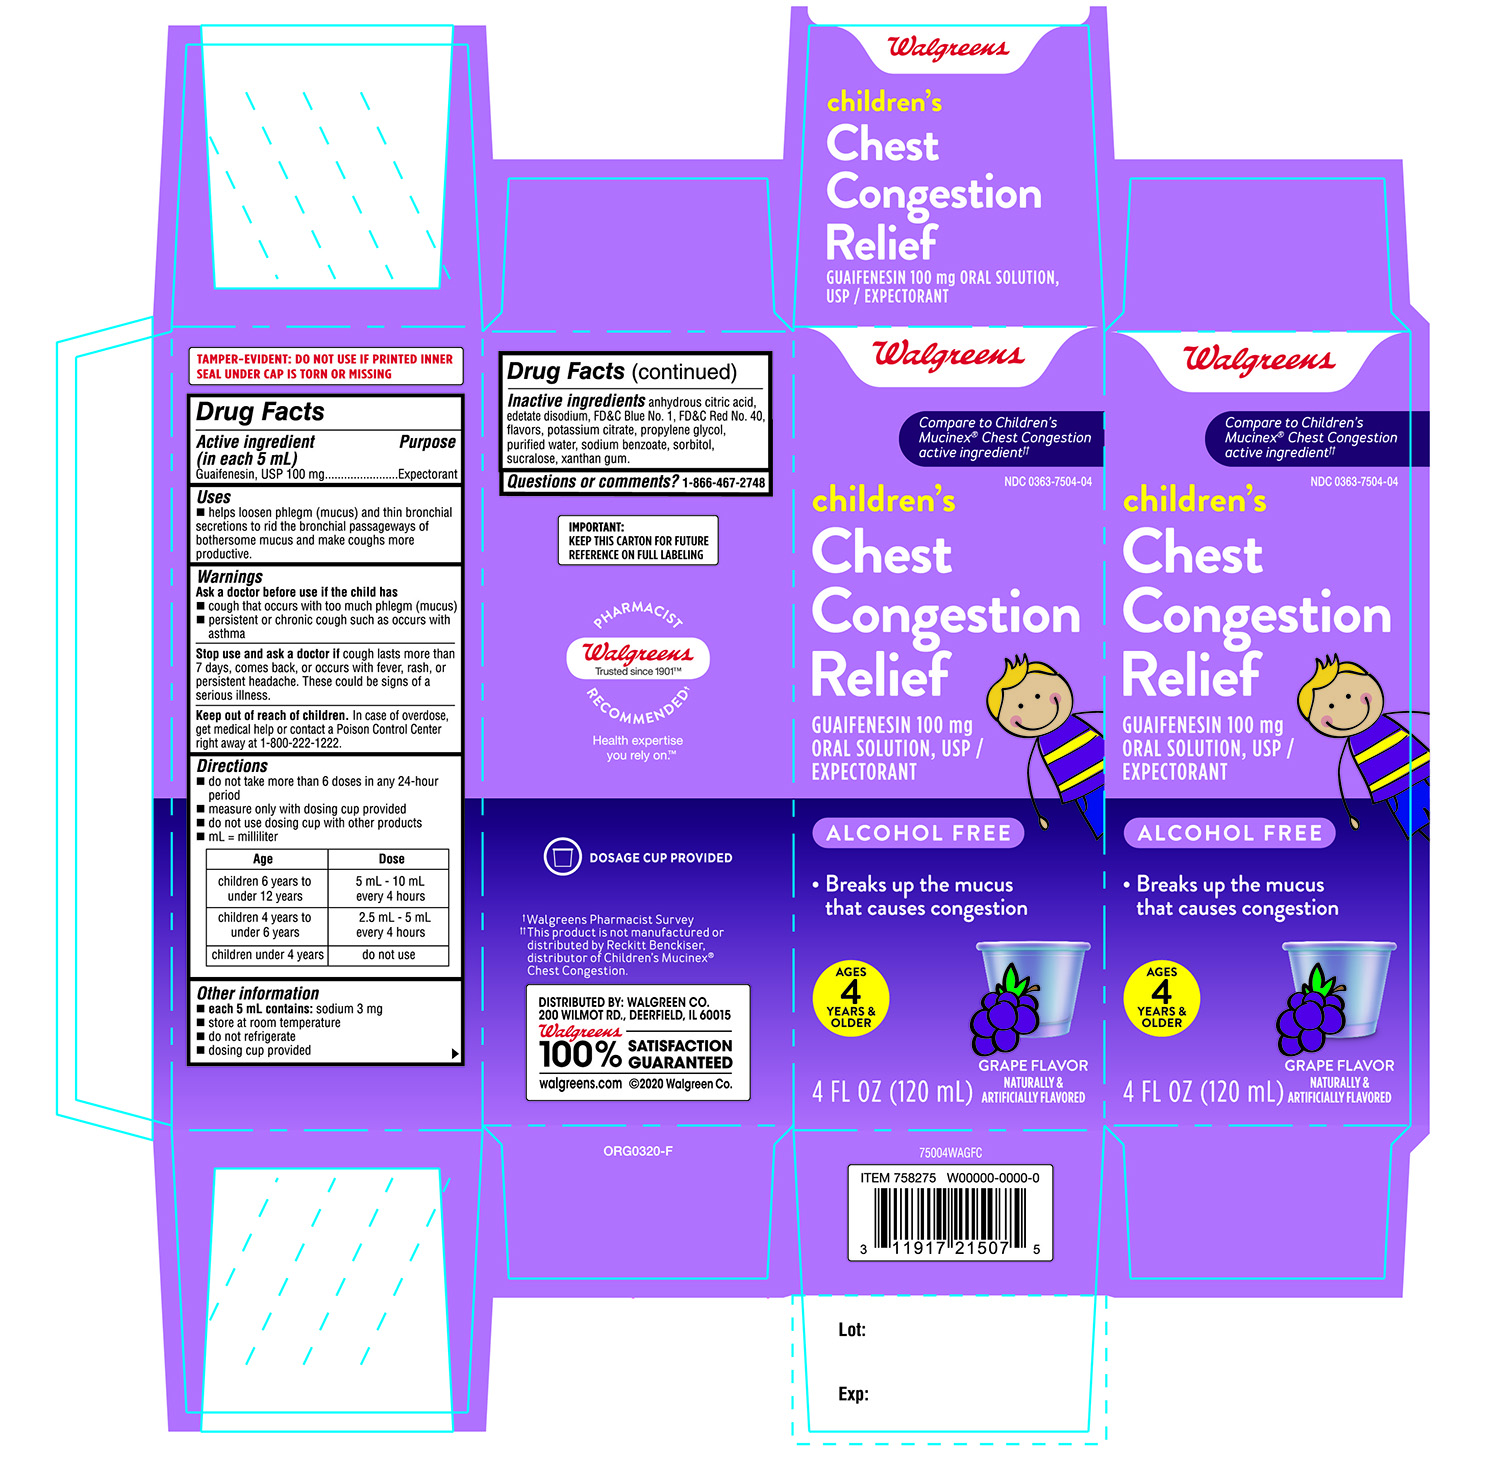 Walgreens Childrens Chest Congestion Relief Grape Flavor